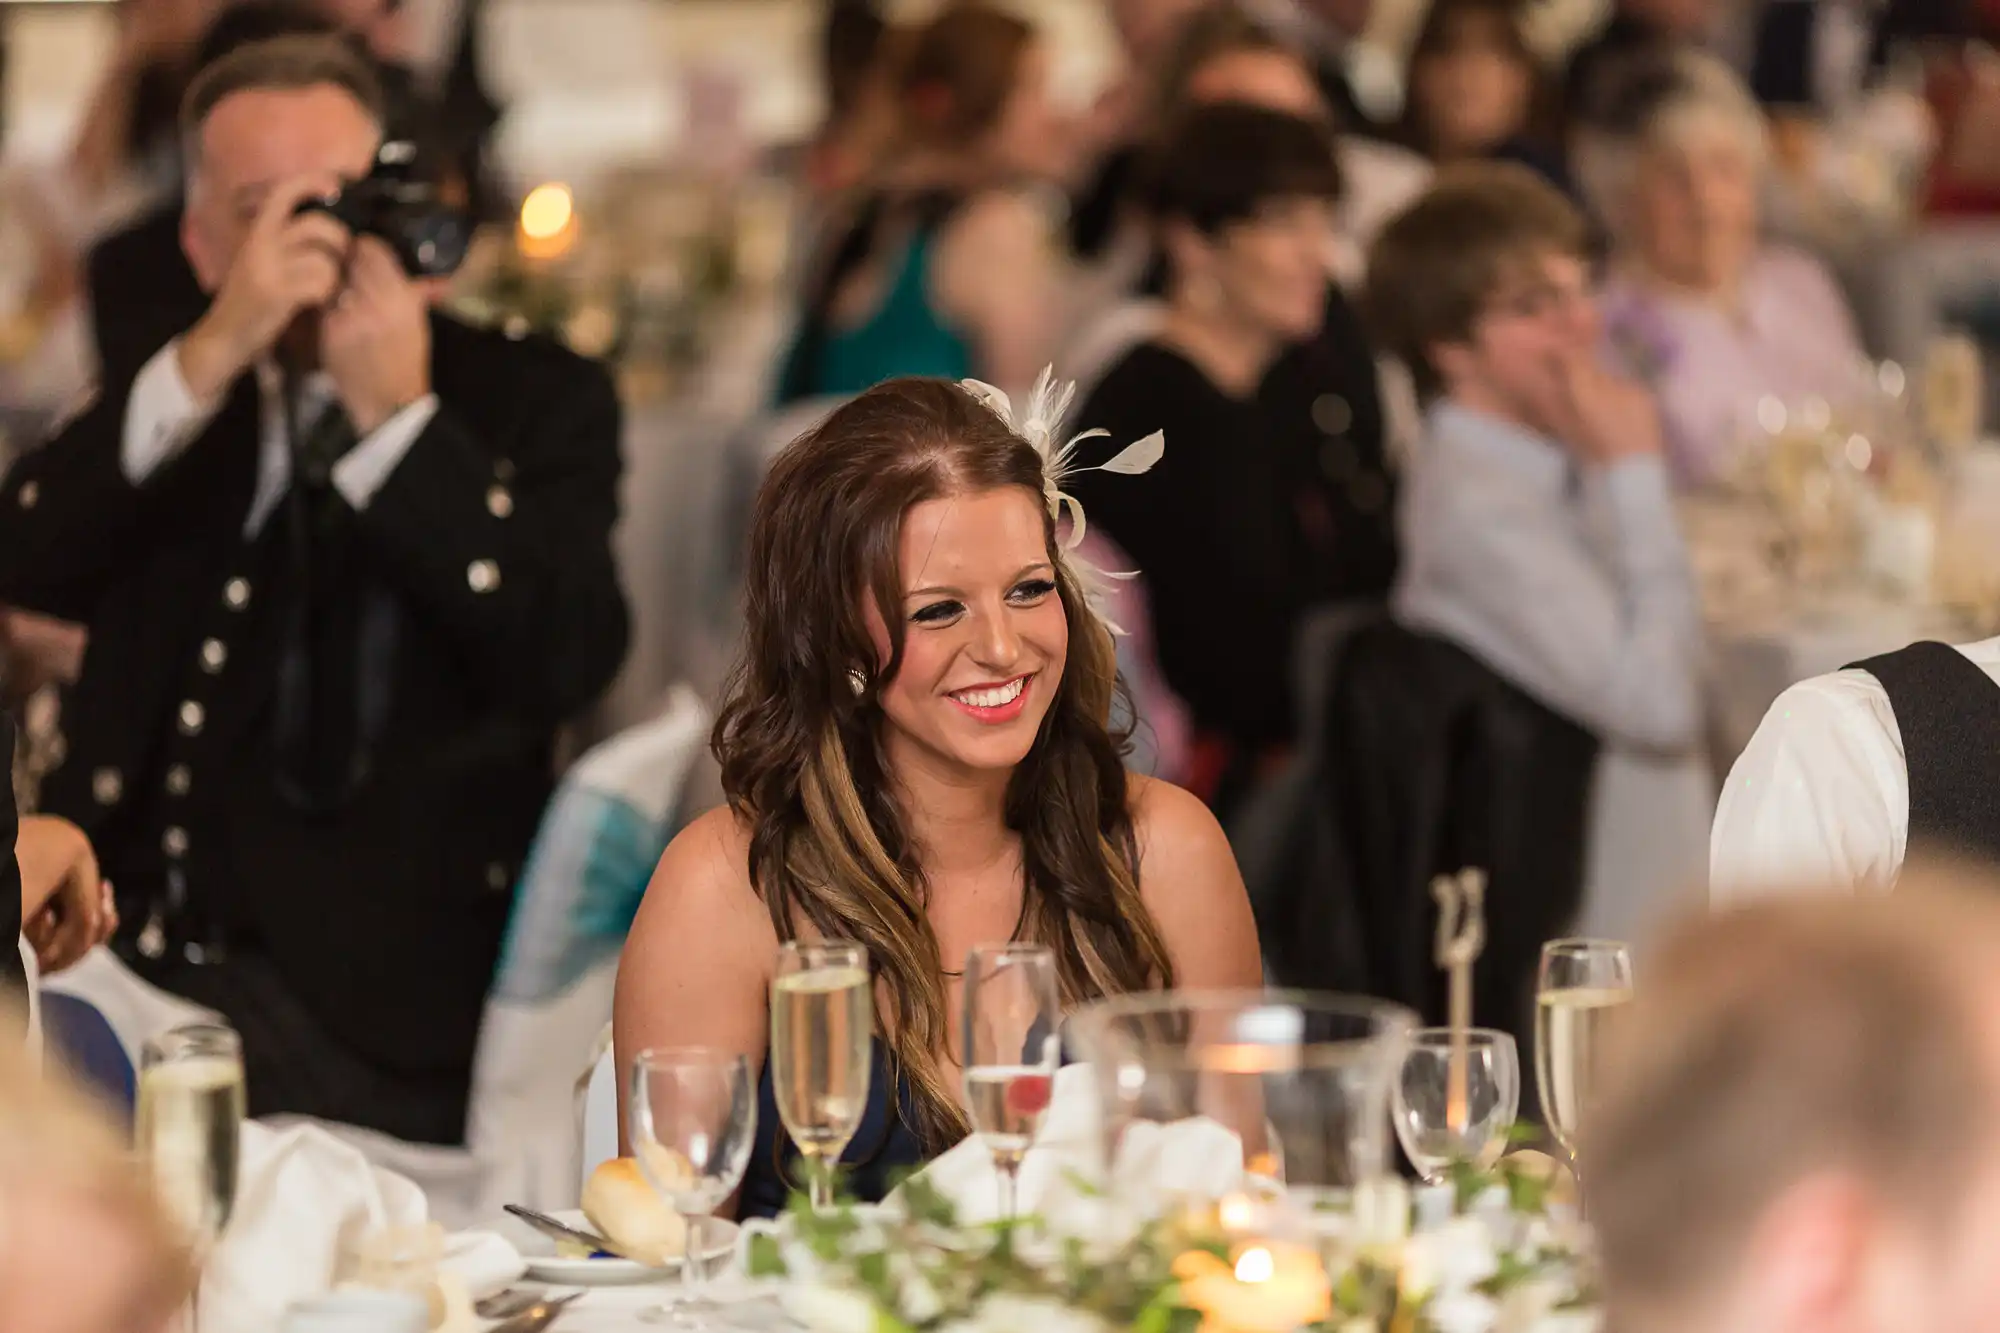 A woman with a feathered hairpiece smiling at a banquet table during an event, with guests and a photographer in the background.